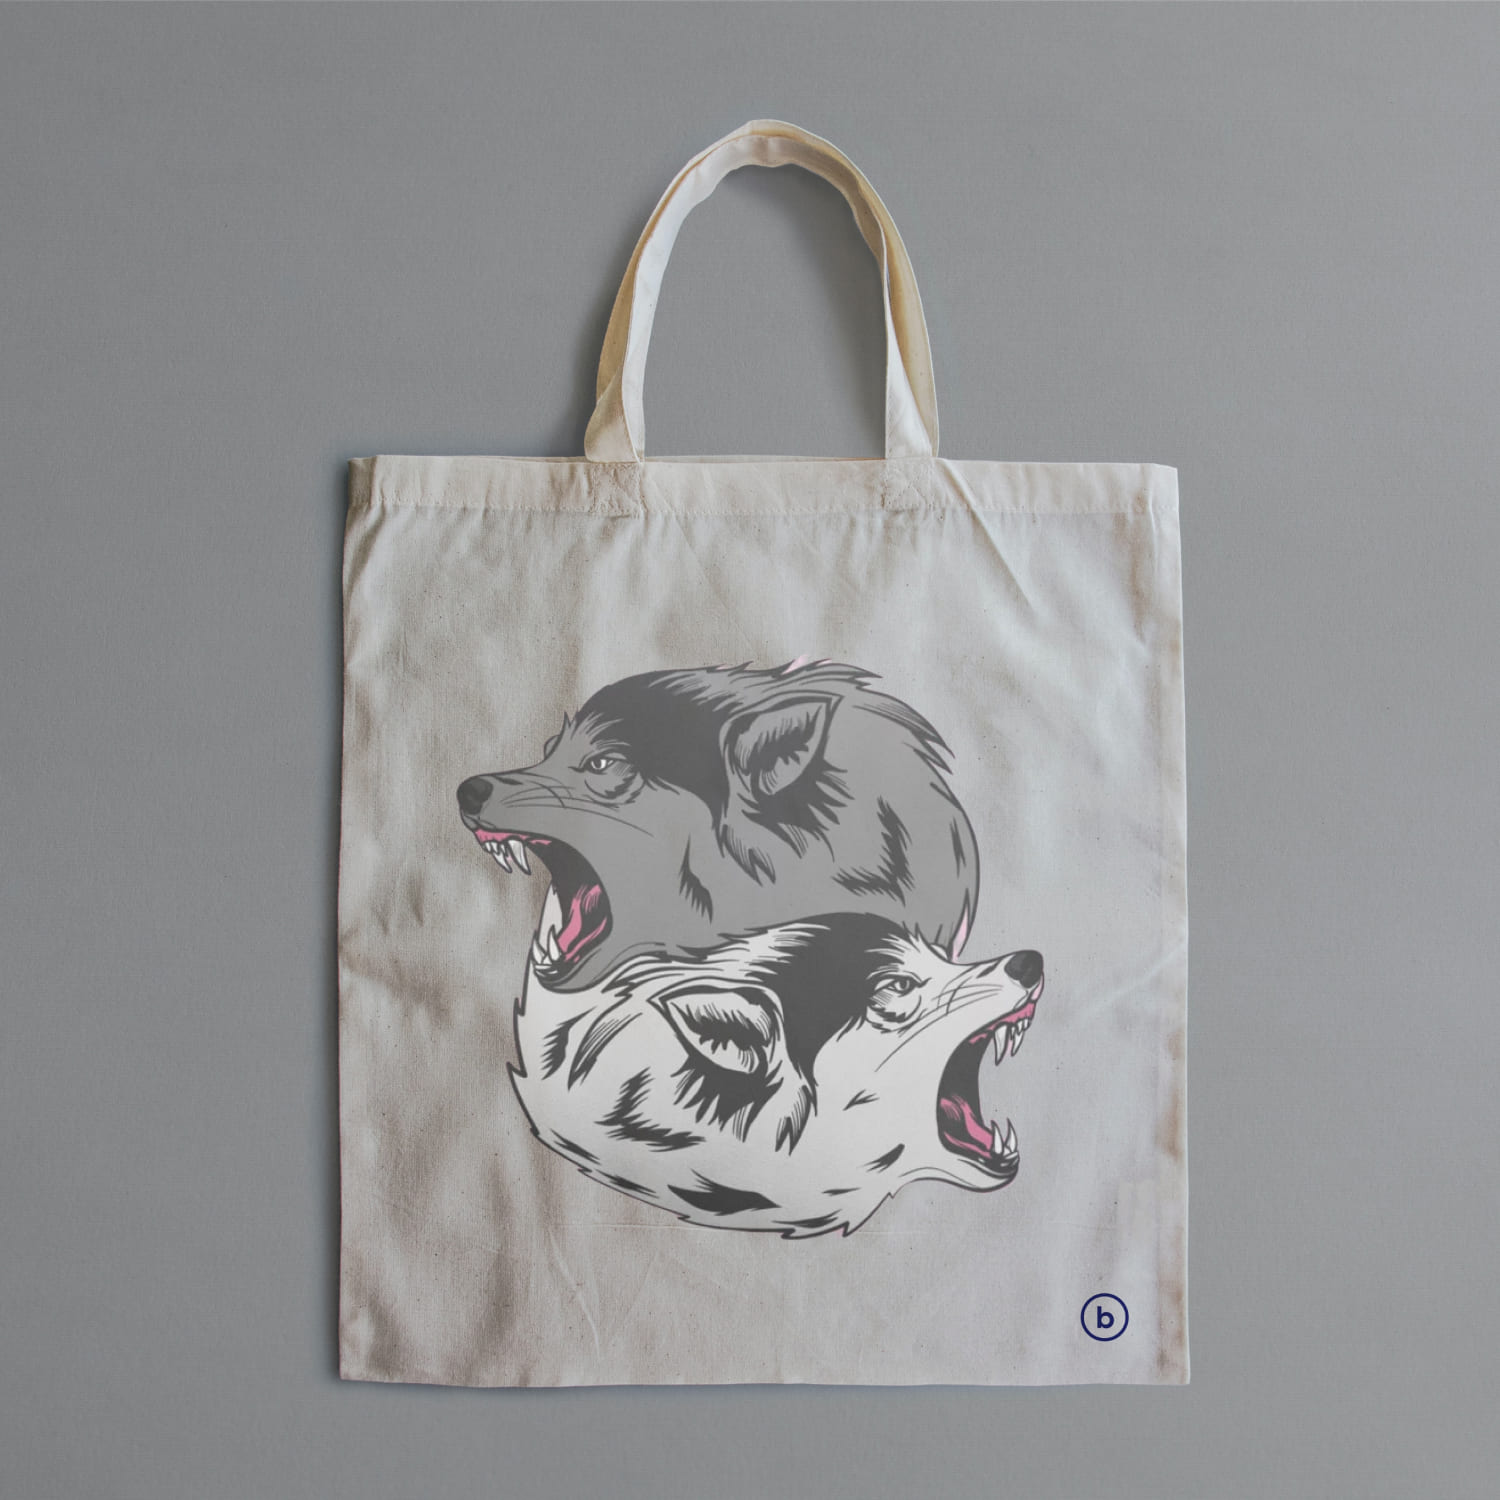 Tote bag with a picture of two bears on it.